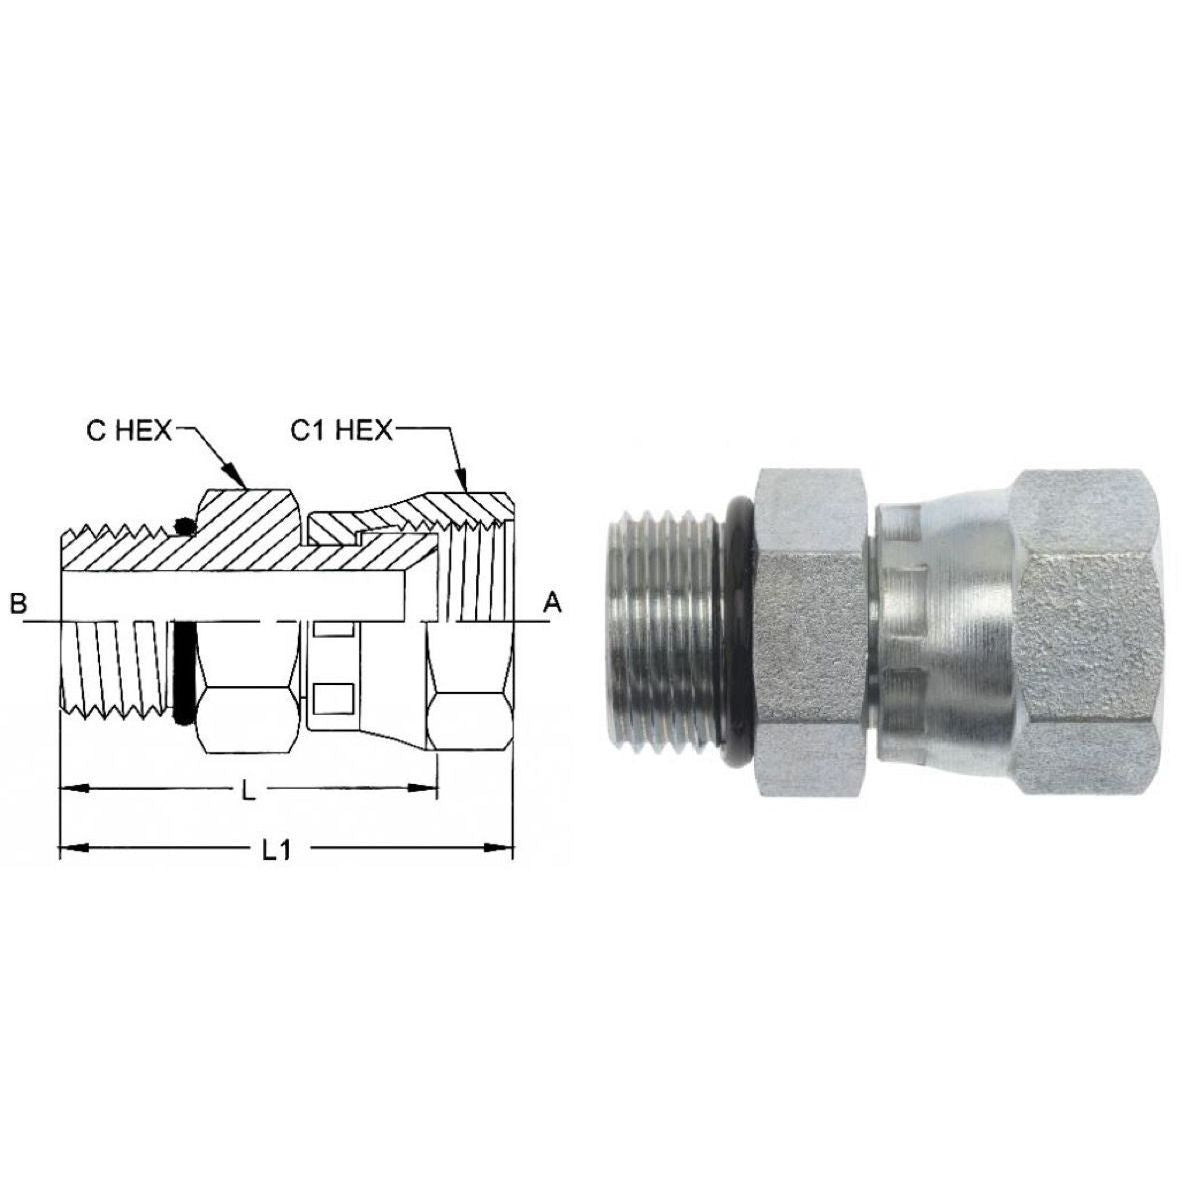 6402-06-06-O-SS : OneHydraulics Straight Adapter, 0.375 (3/8) Male ORB x 0.375 (3/8) Female JIC Swivel, Stainless Steel, 6000psi